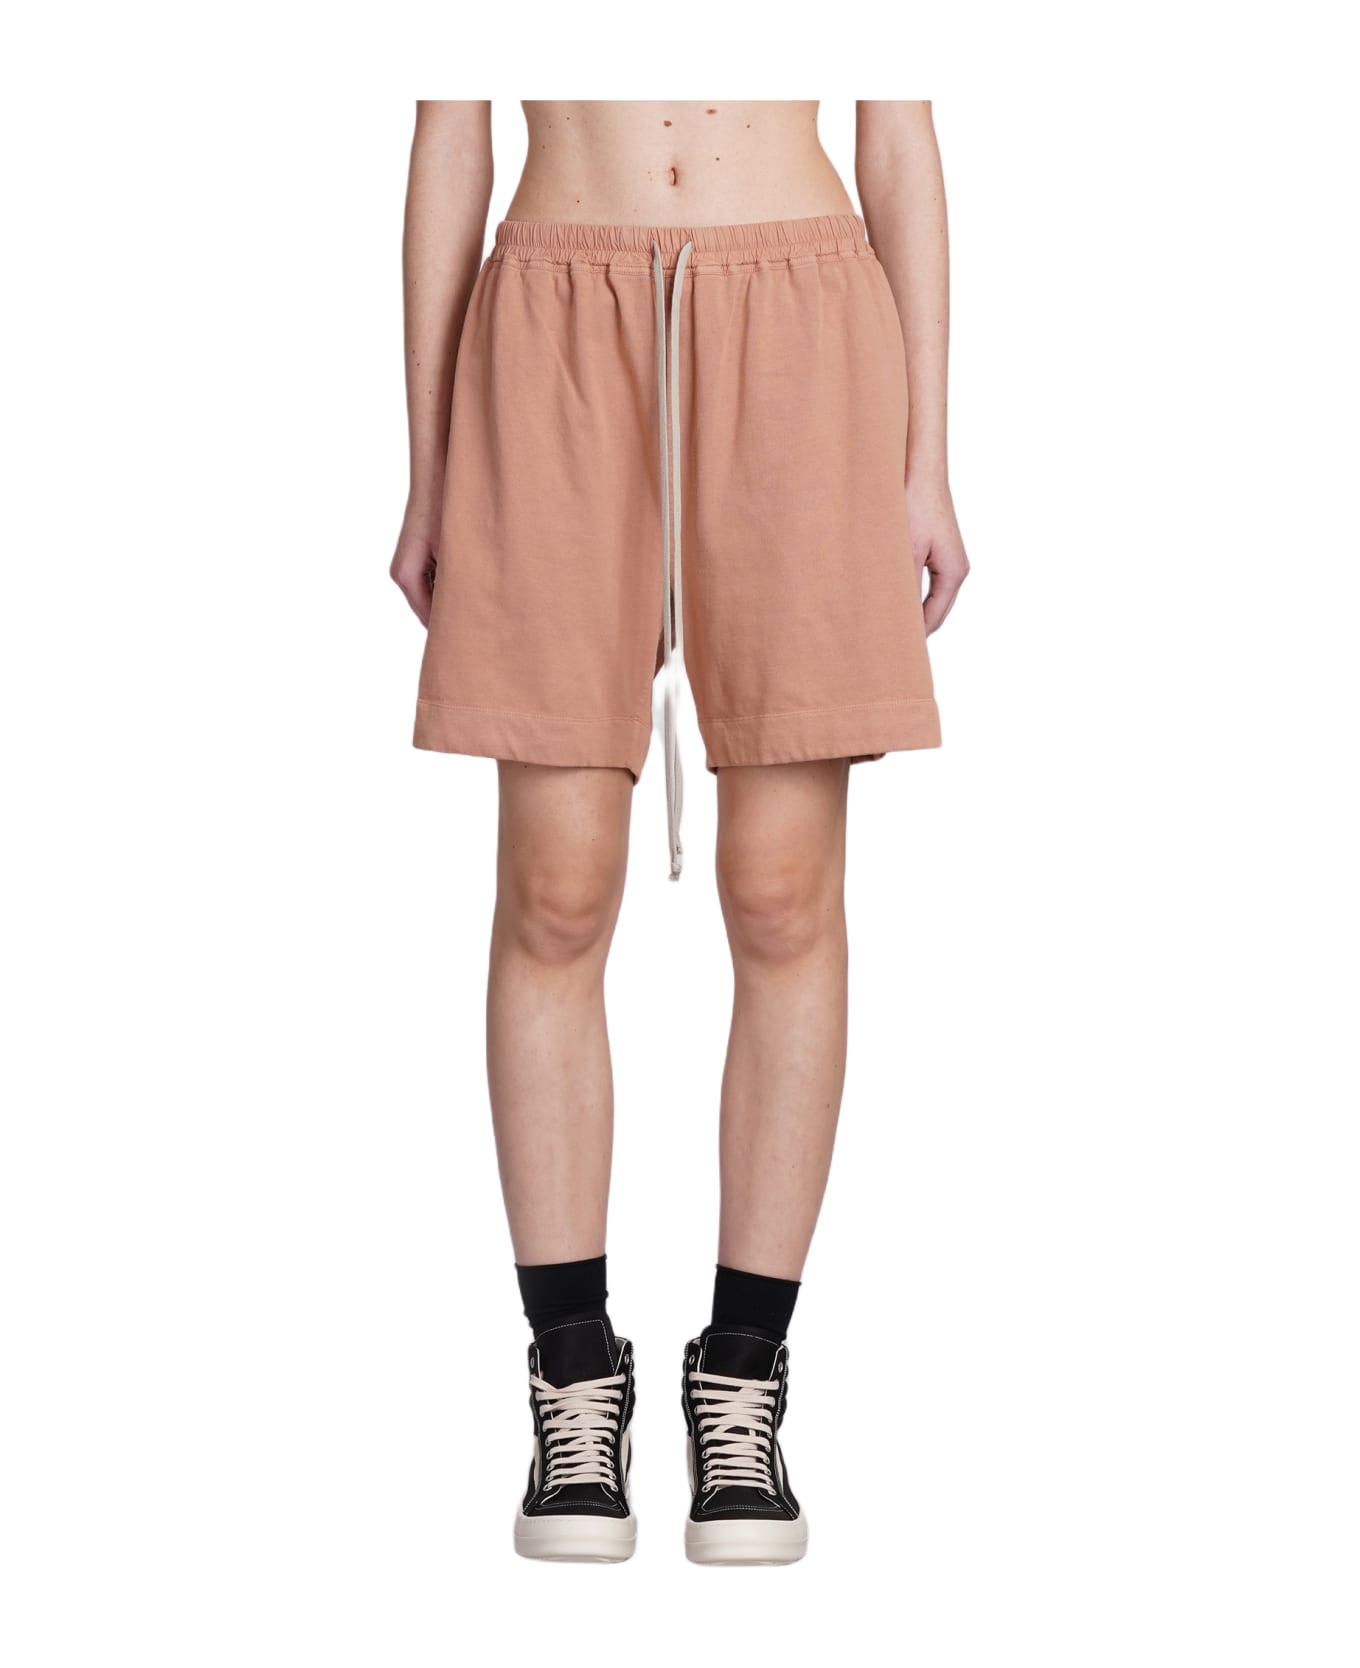 DRKSHDW Boxers Shorts In Rose-pink Cotton - rose-pink